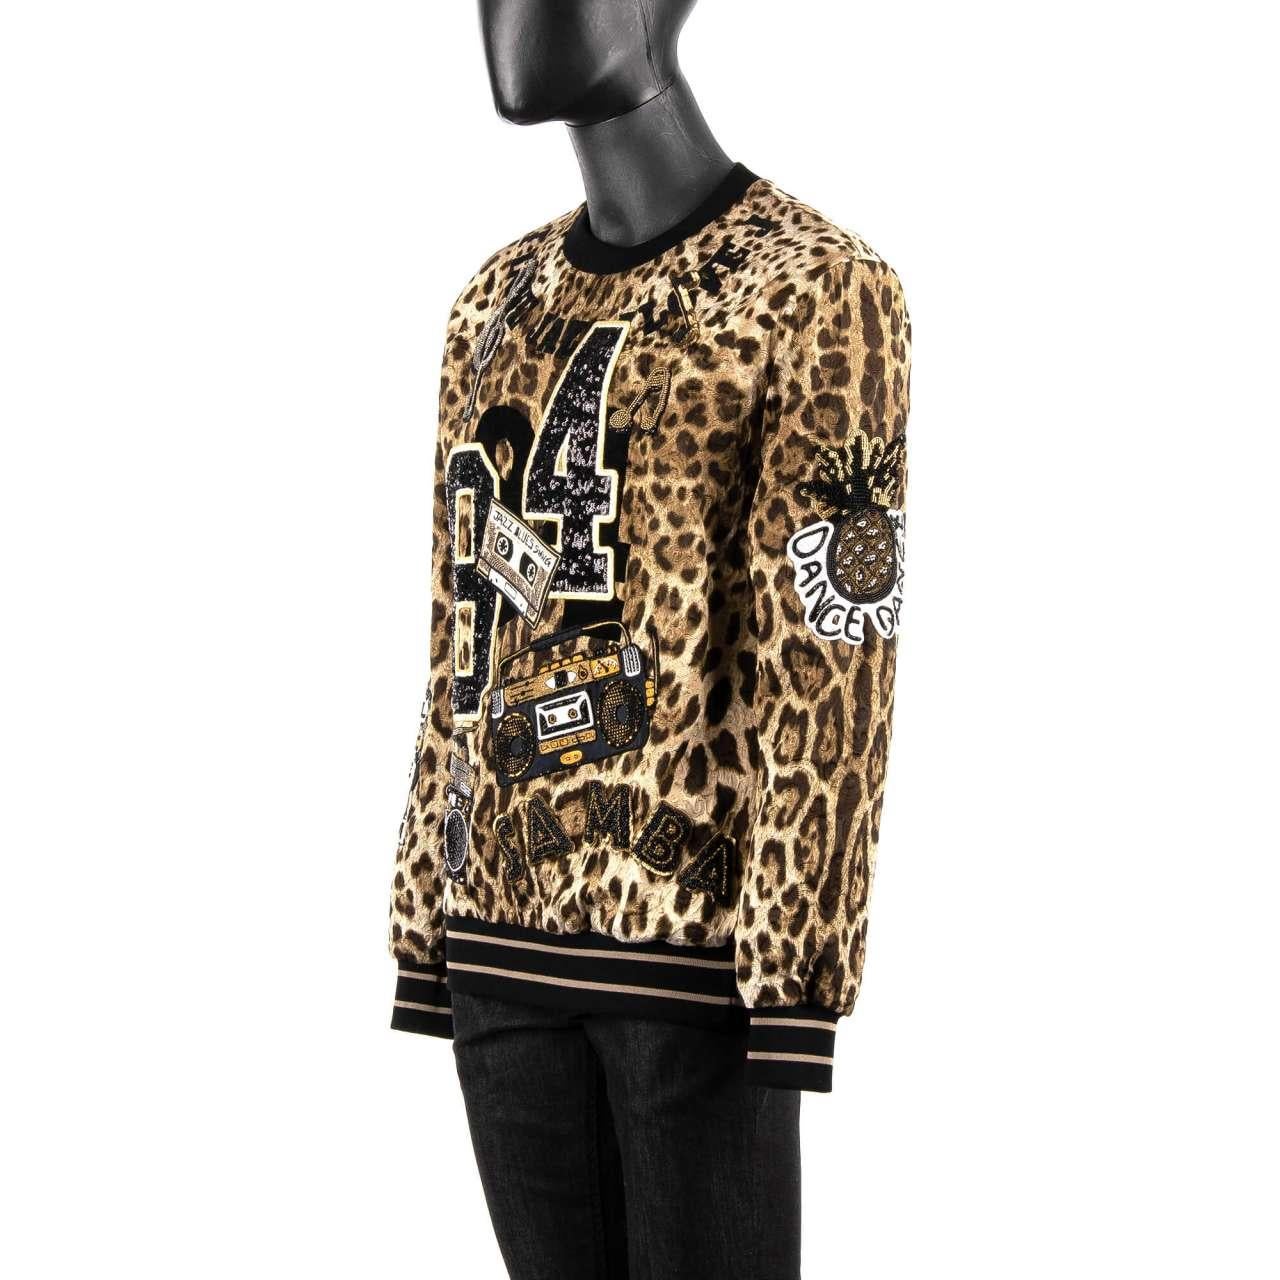 D&G Leopard Printed Sweater with Jazz Samba Music Embroidery Black Brown 46 In Excellent Condition For Sale In Erkrath, DE